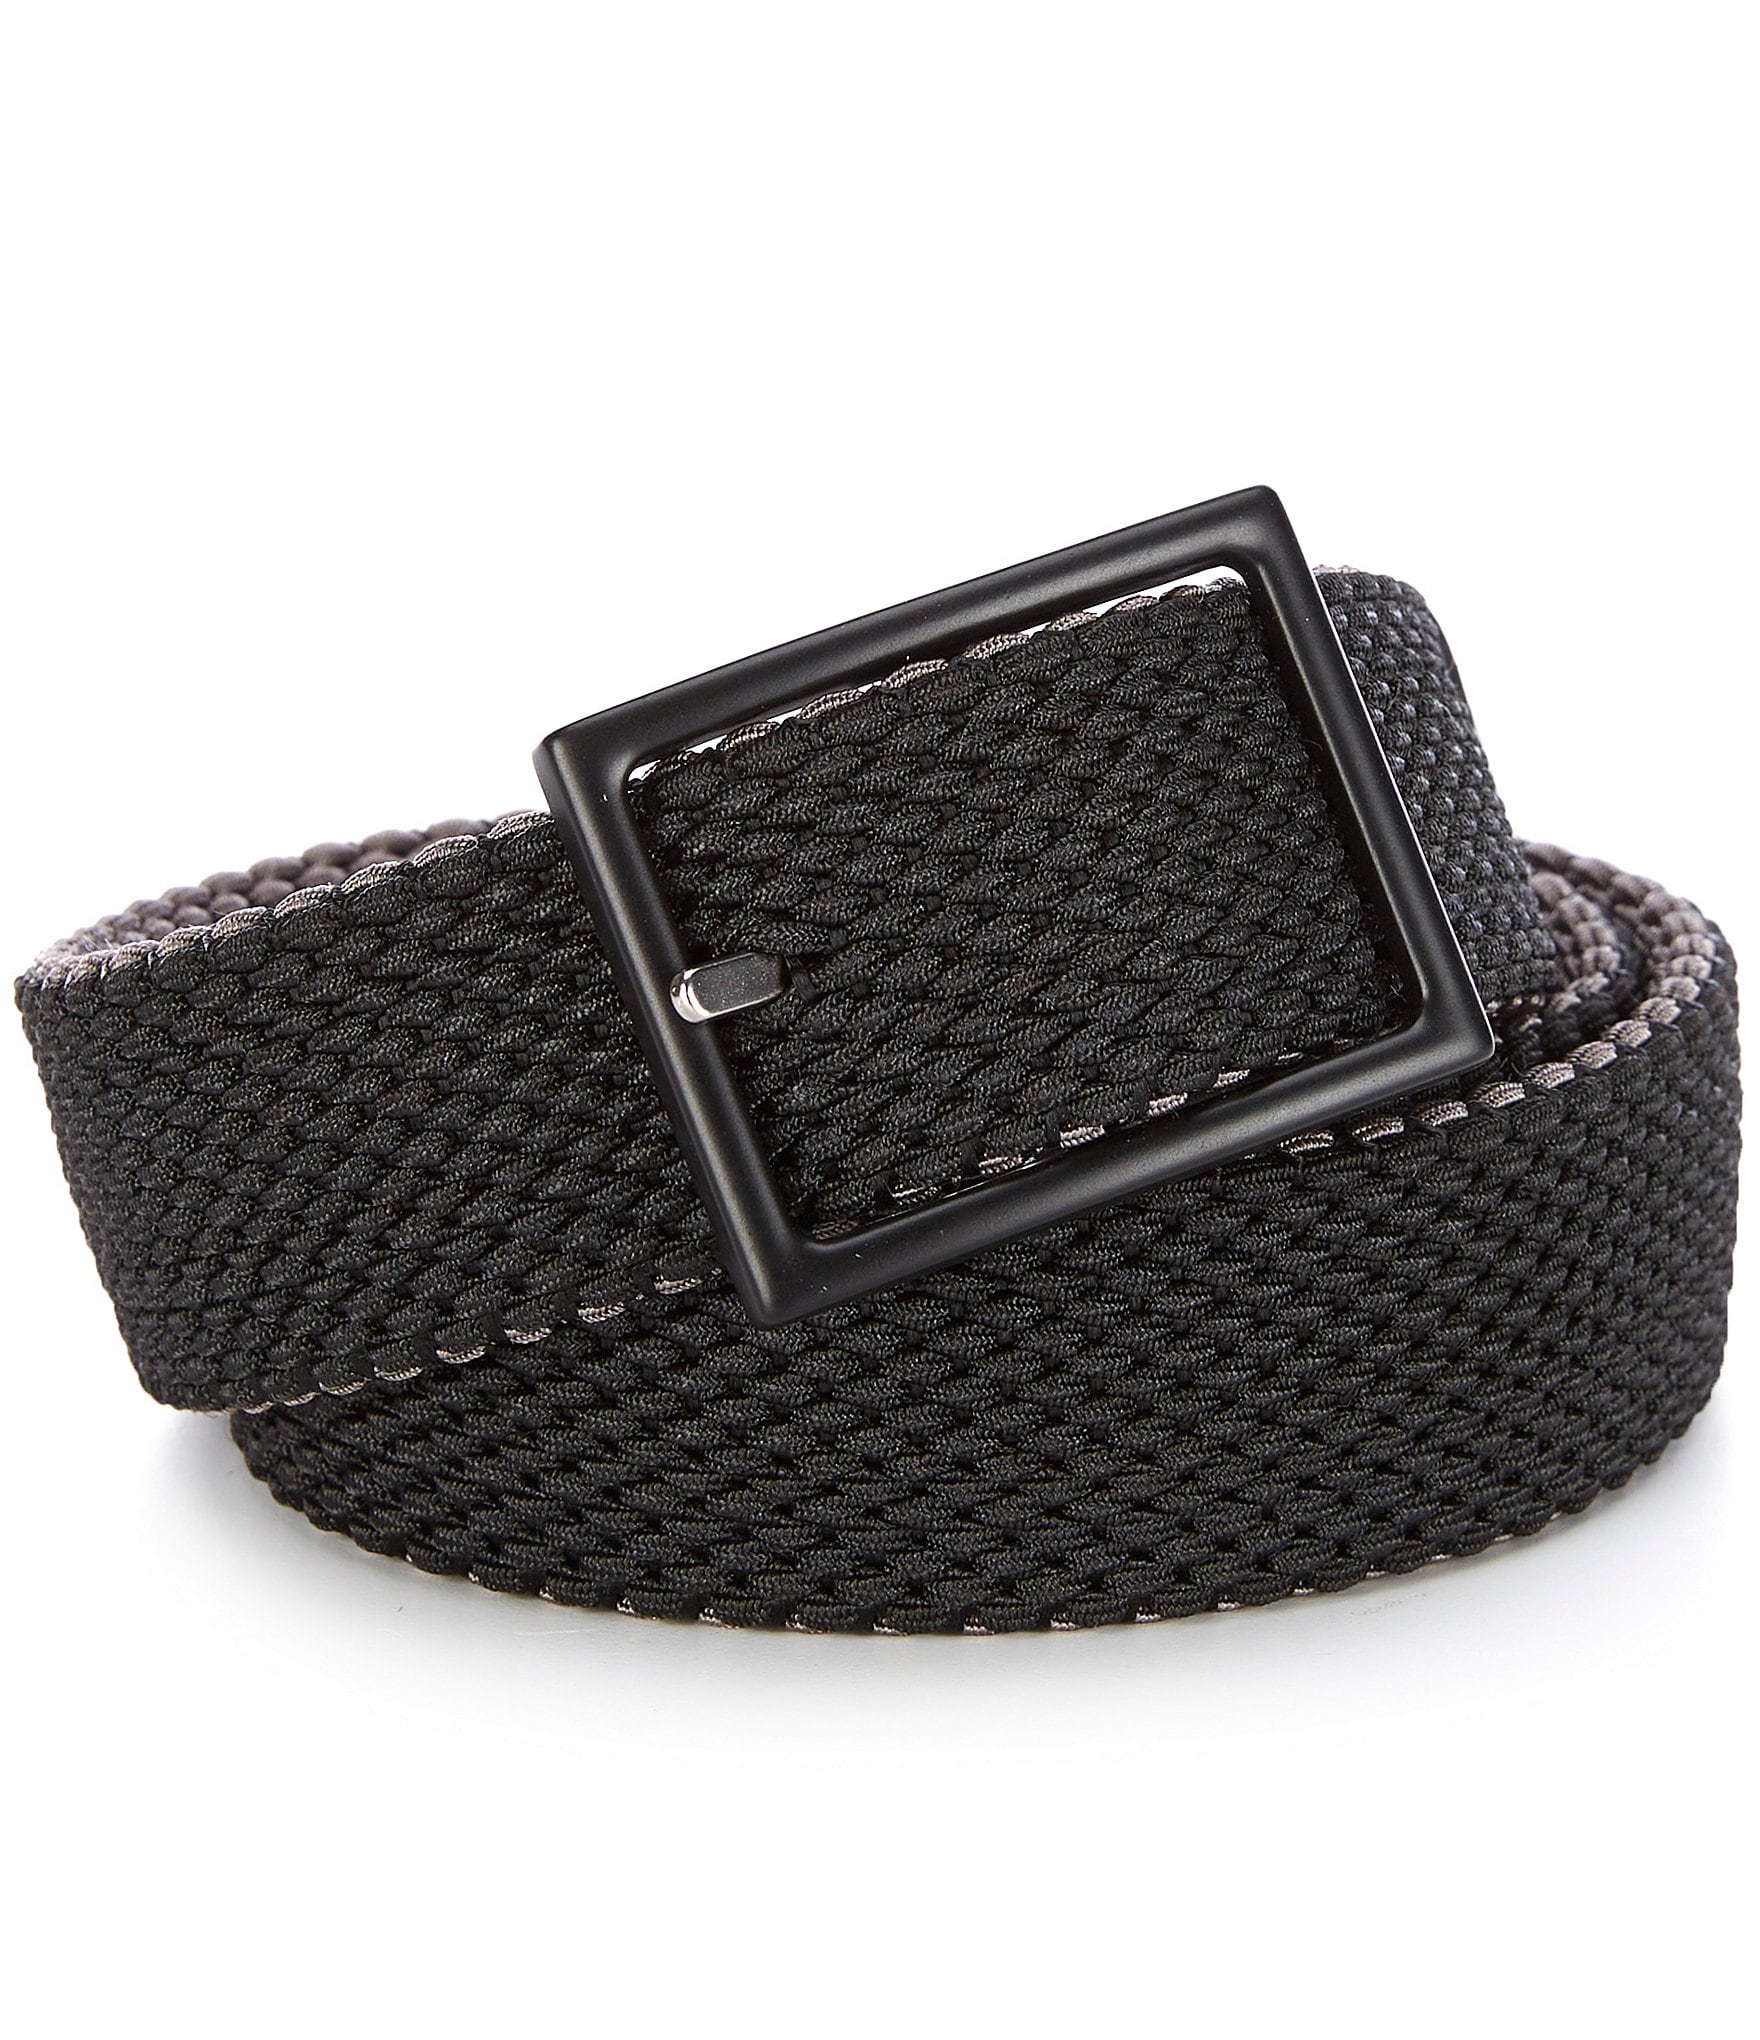 Herringbone Woven Leather And Cord Belt Ornate Silver Buckle Made In Spain